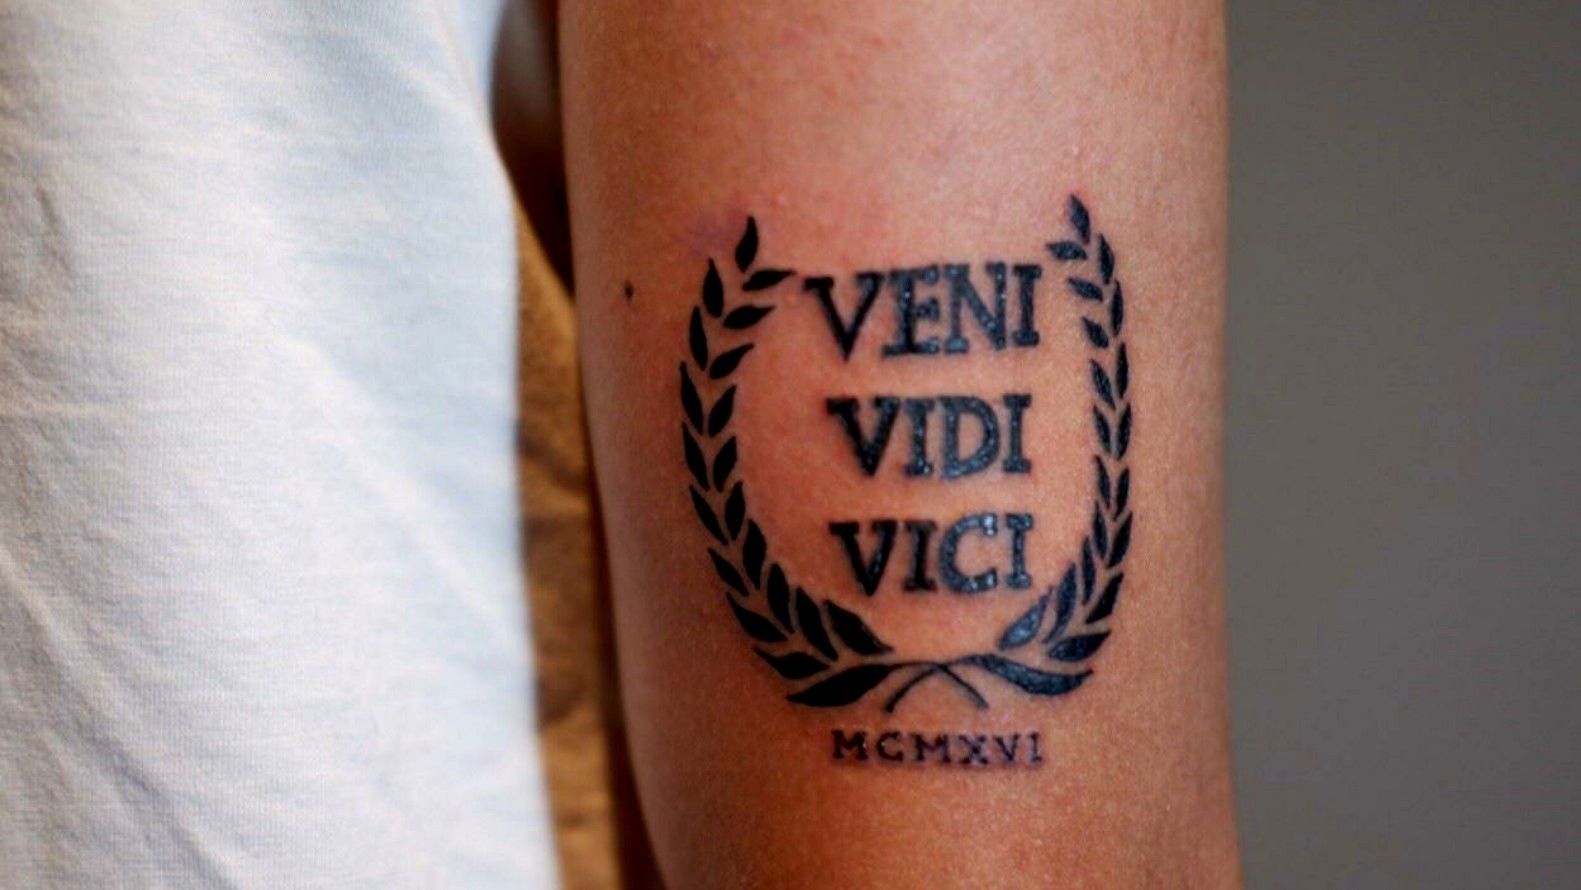 VENI VIDI VICI tattoo by Loughie Alston inked on a forearm  Meaningful  tattoos Tattoos Word tattoos